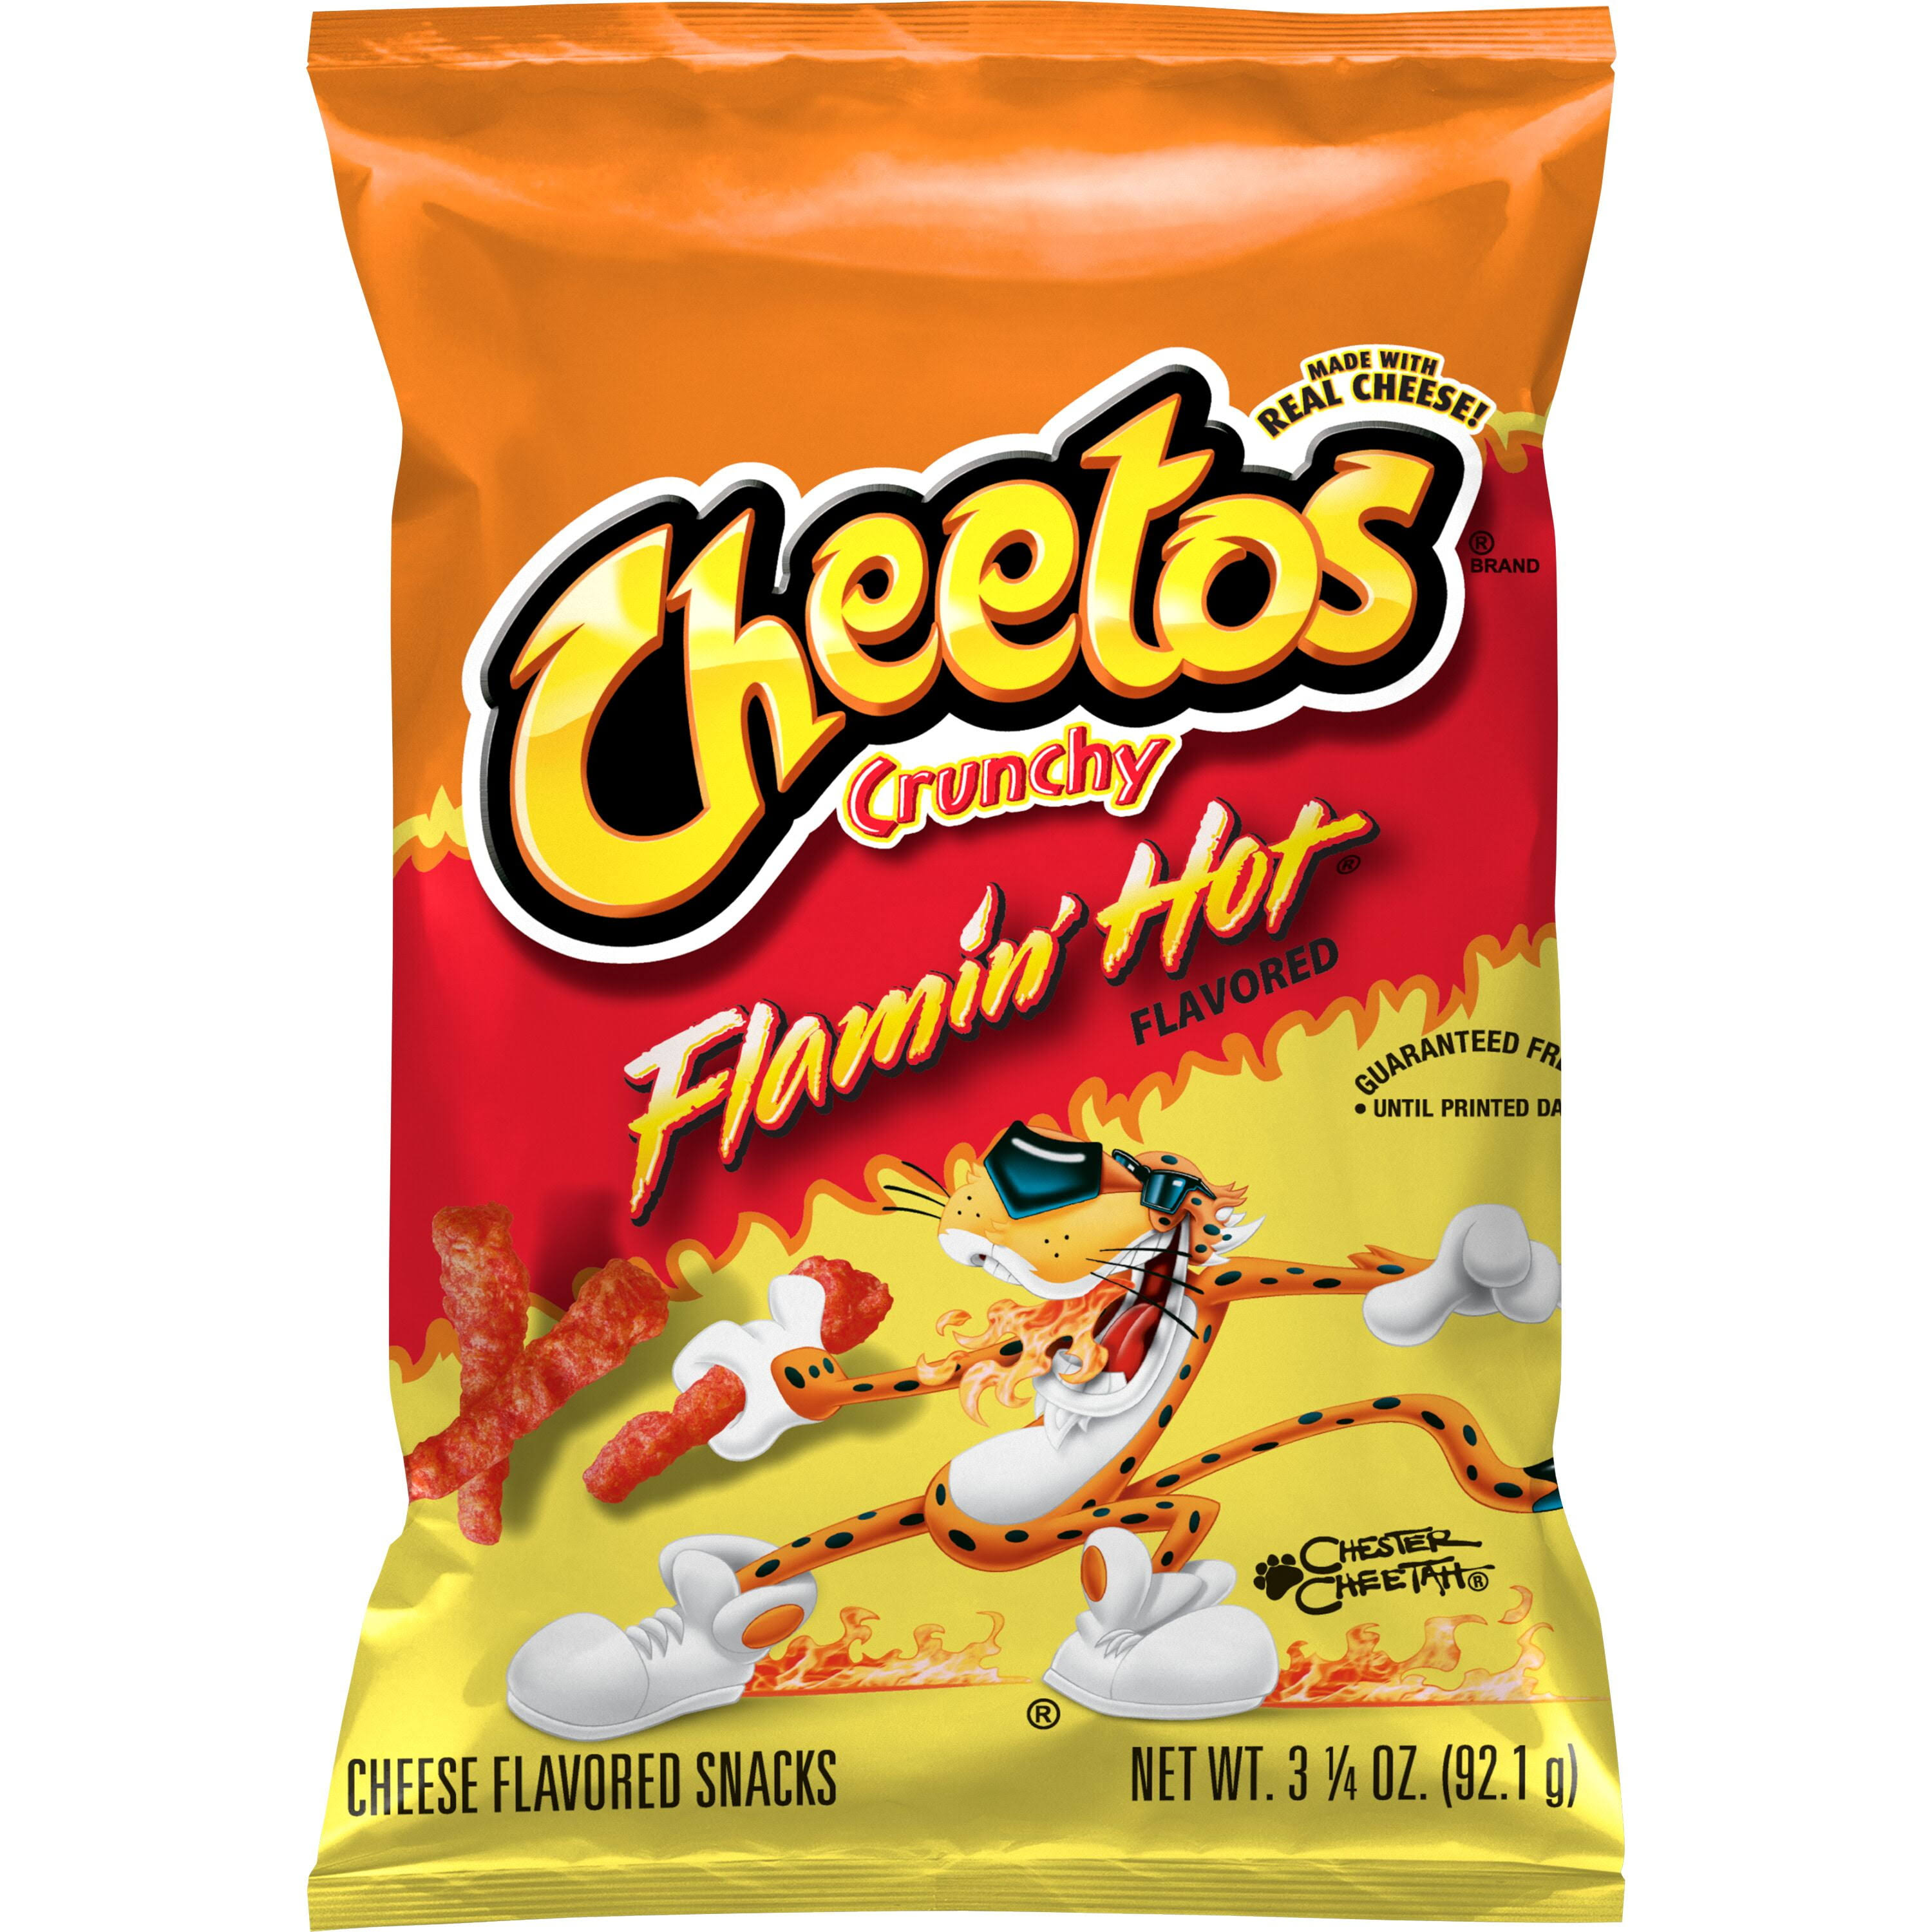 Cheetos Cheese Snacks, Crunchy Hot, 2-Ounce Large Single Serve Bags (Pack of 64)